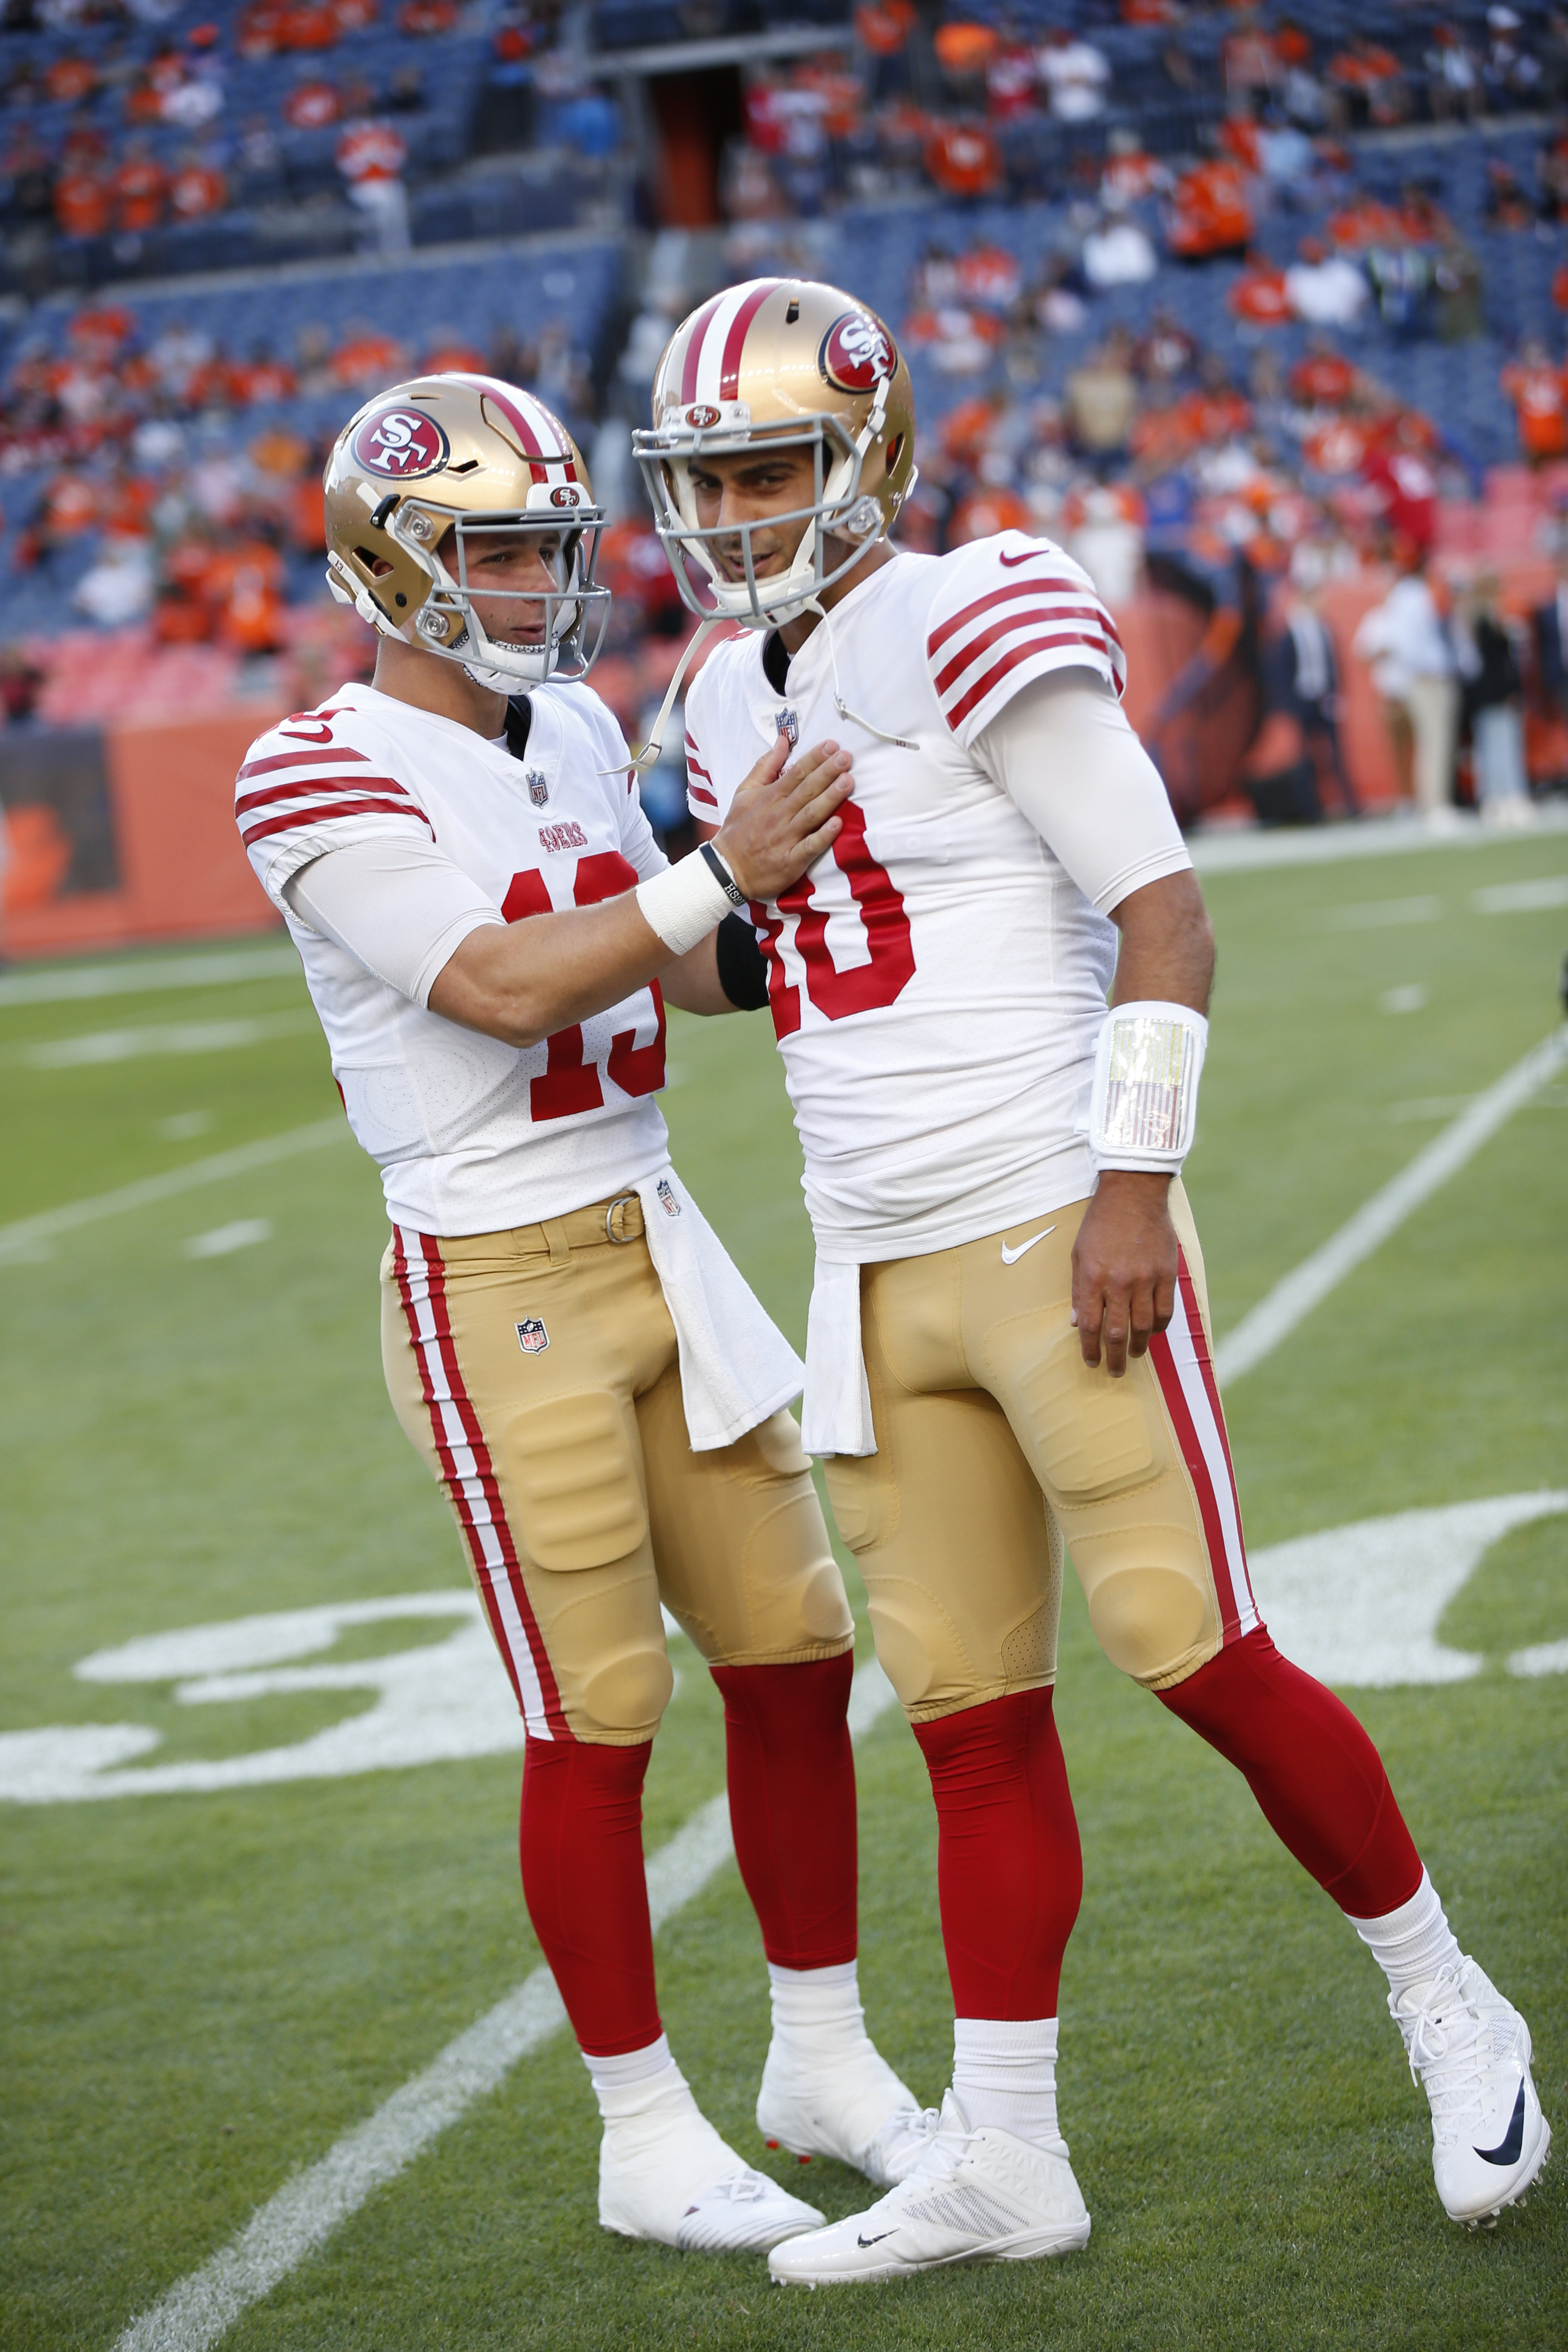 Brock Purdy #13 and Jimmy Garoppolo #10 of the San Francisco 49ers on the field before the game against the Denver Broncos at Empower Field At Mile High on September 25, 2022 in Denver, Colorado.